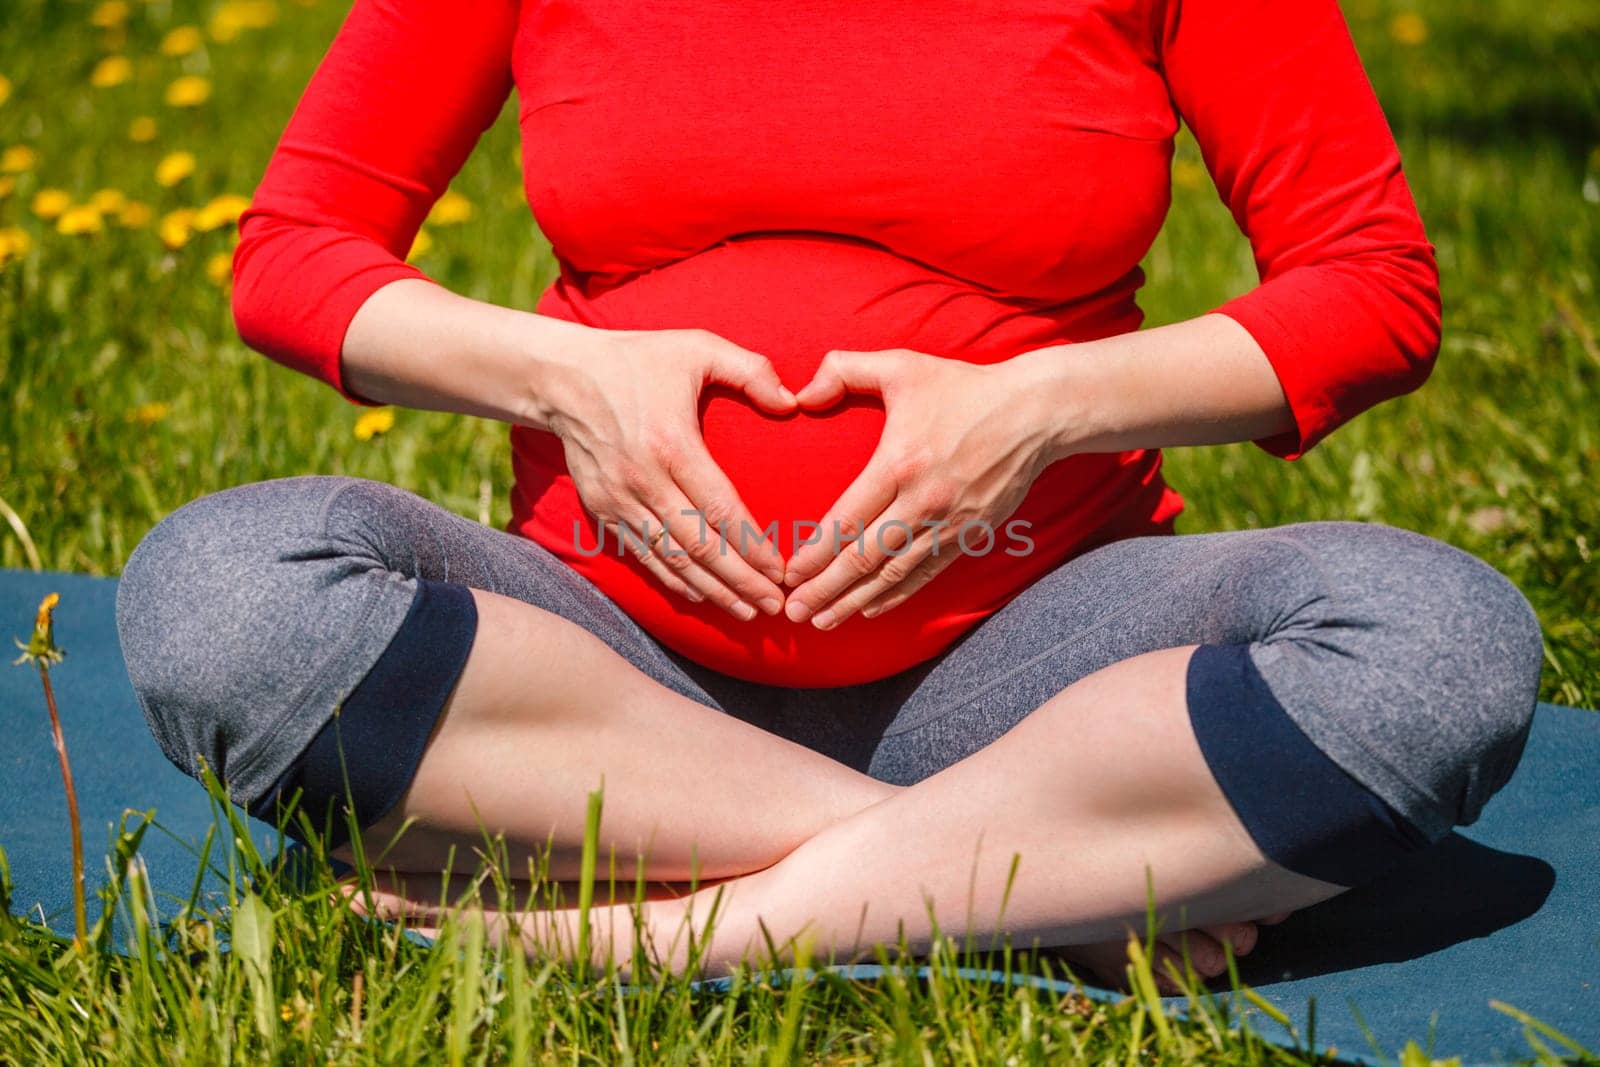 Pregnancy yoga exercise - pregnant woman doing asana Sukhasana easy yoga pose showing heart symbol with hands outdoors on grass lawn with dandelions in summer